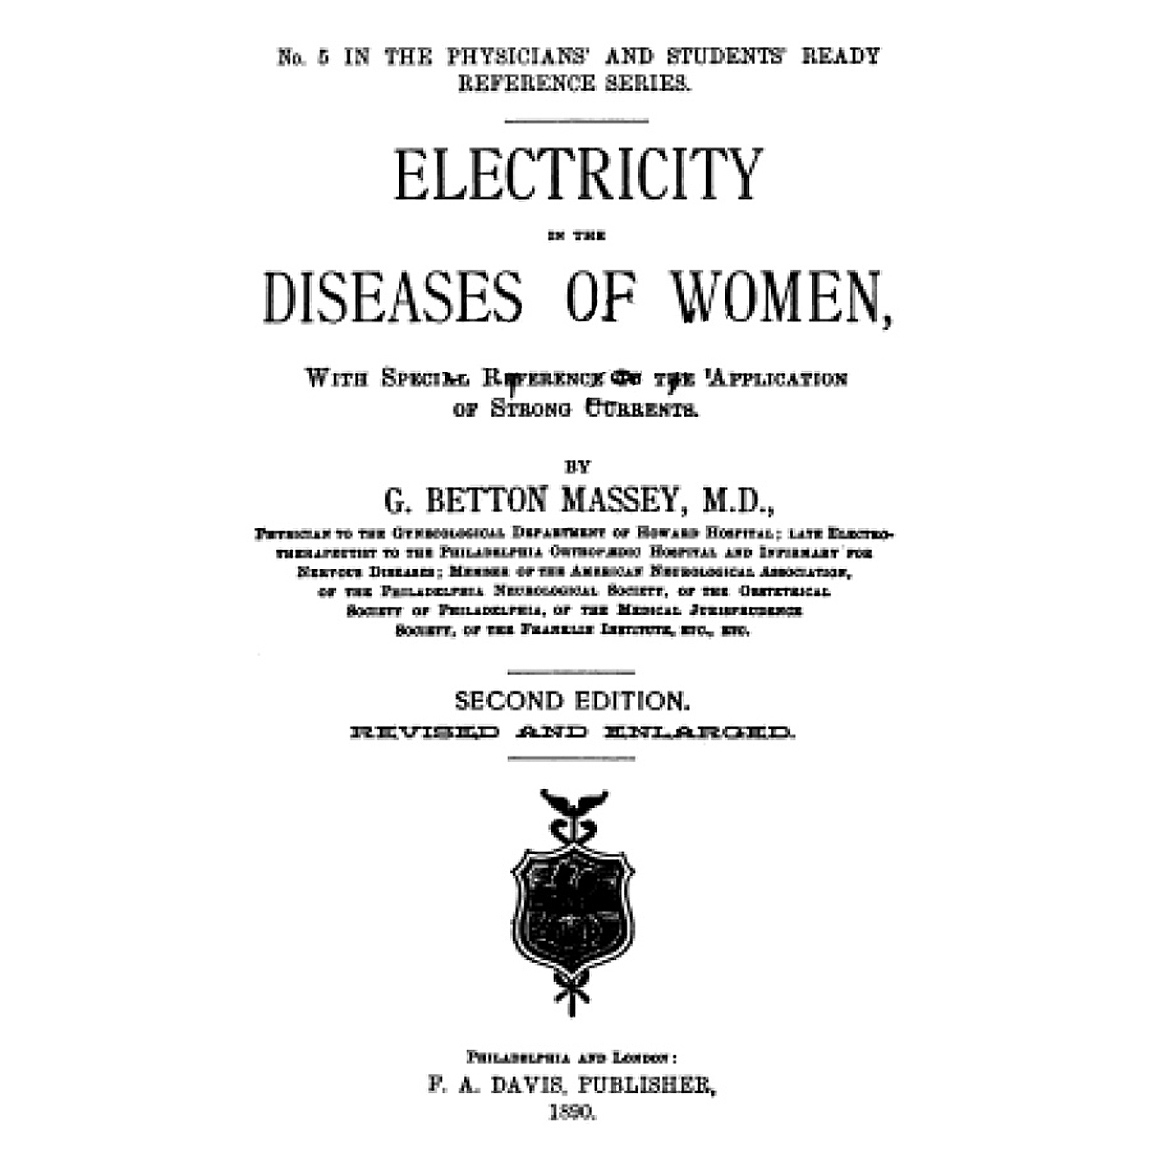 1890-MASSEY-Electricity-Diseases-Women-title